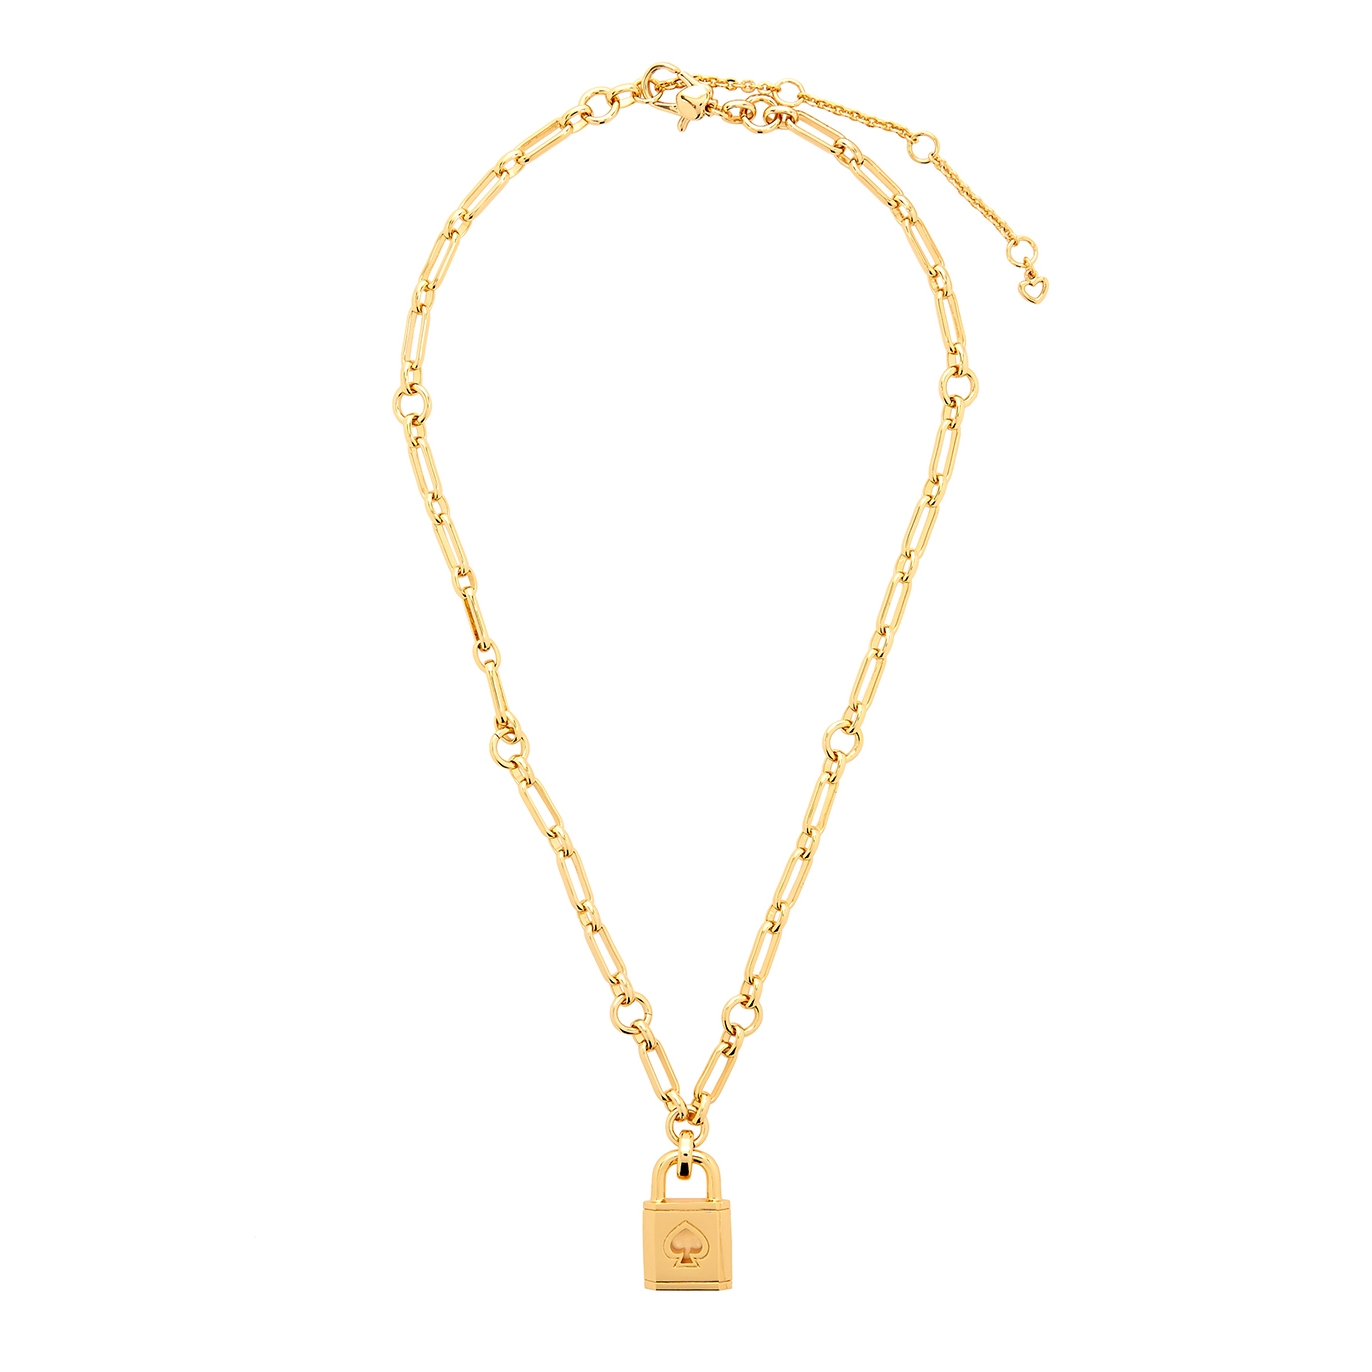 Kate Spade New York lock and spade gold-tone chain necklace